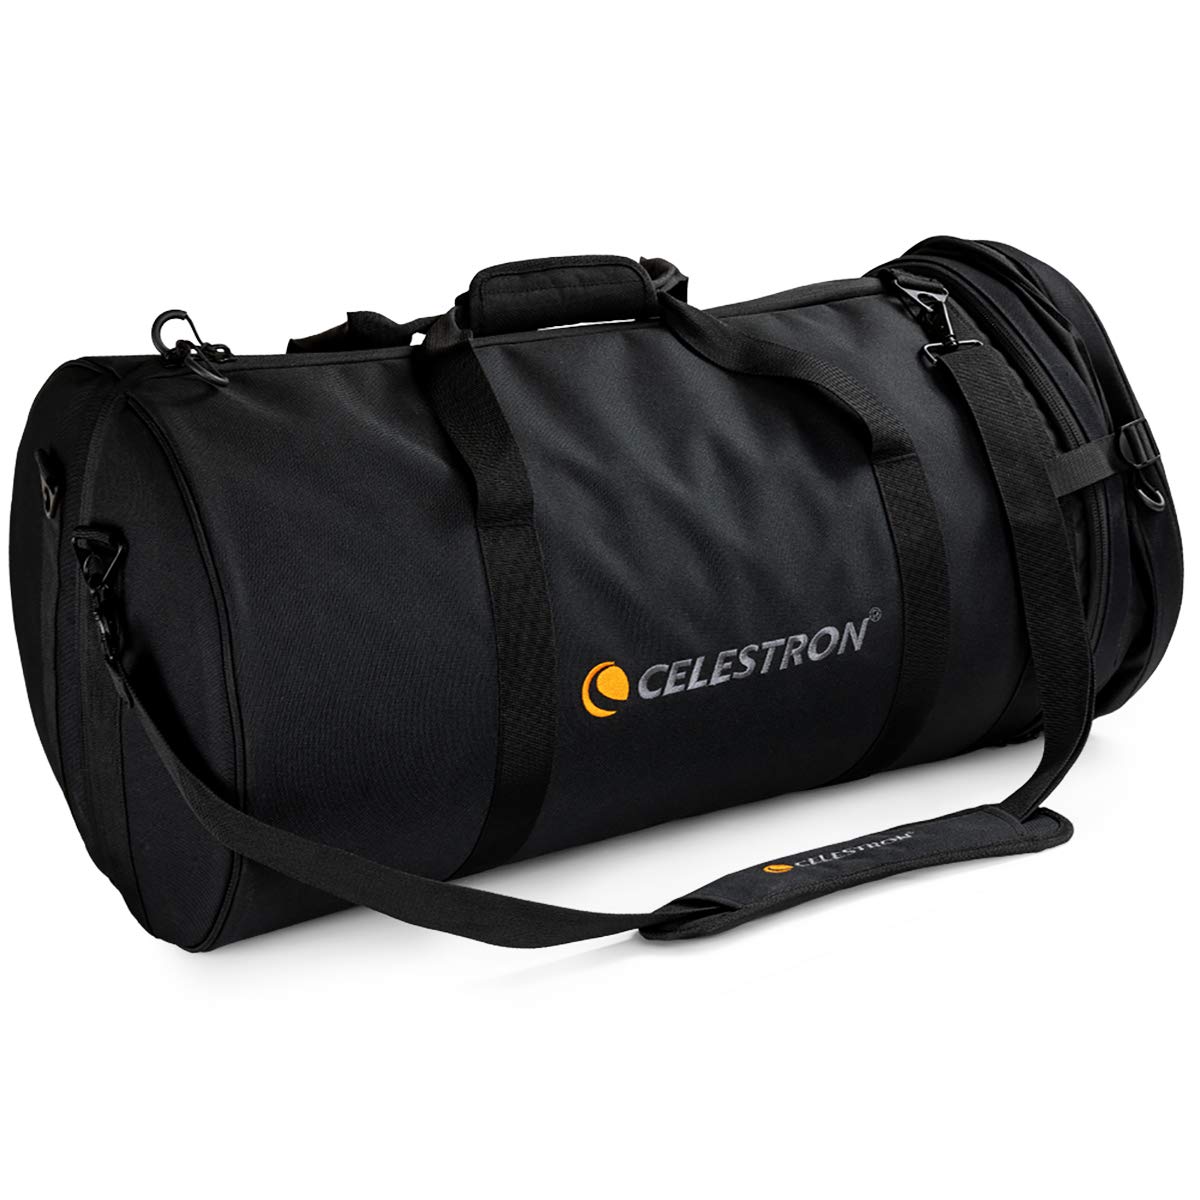 Celestron – 11” Telescope Optical Tube Bag – Custom Carrying Case Fits Schmidt-Cassegrain and EdgeHD – Ultra-durable Protective Walls – Padded Straps for Easy Carry